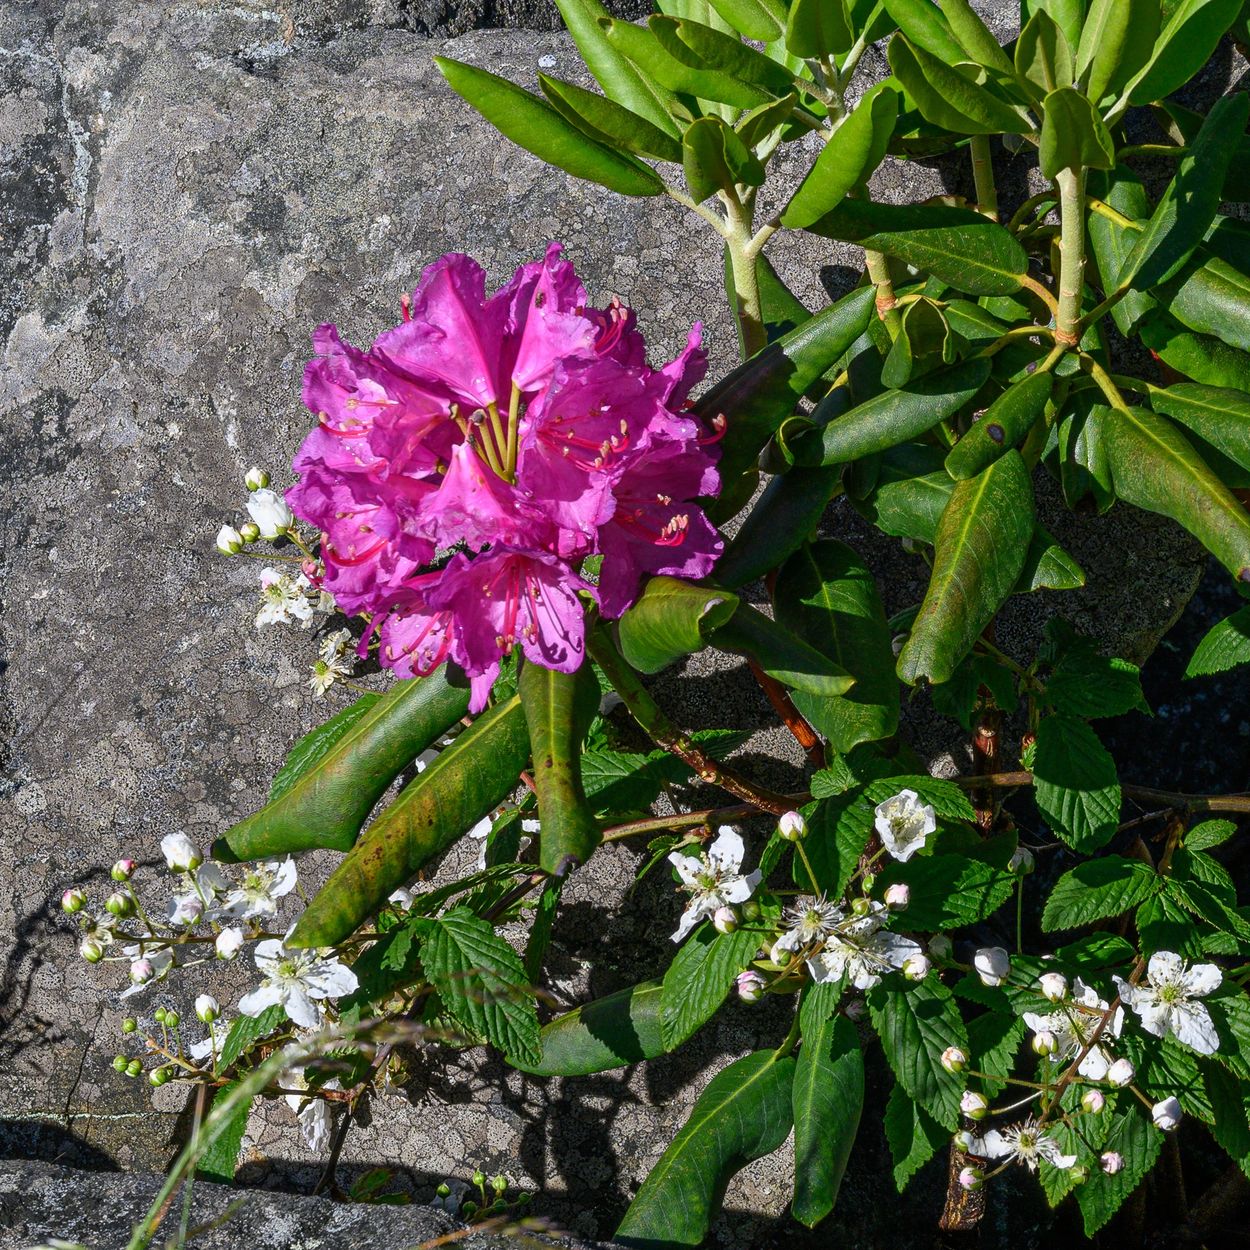 Rhododendron and Moutain Laurel on Roan Mountain Bald, North Carolina/Tennessee Border.